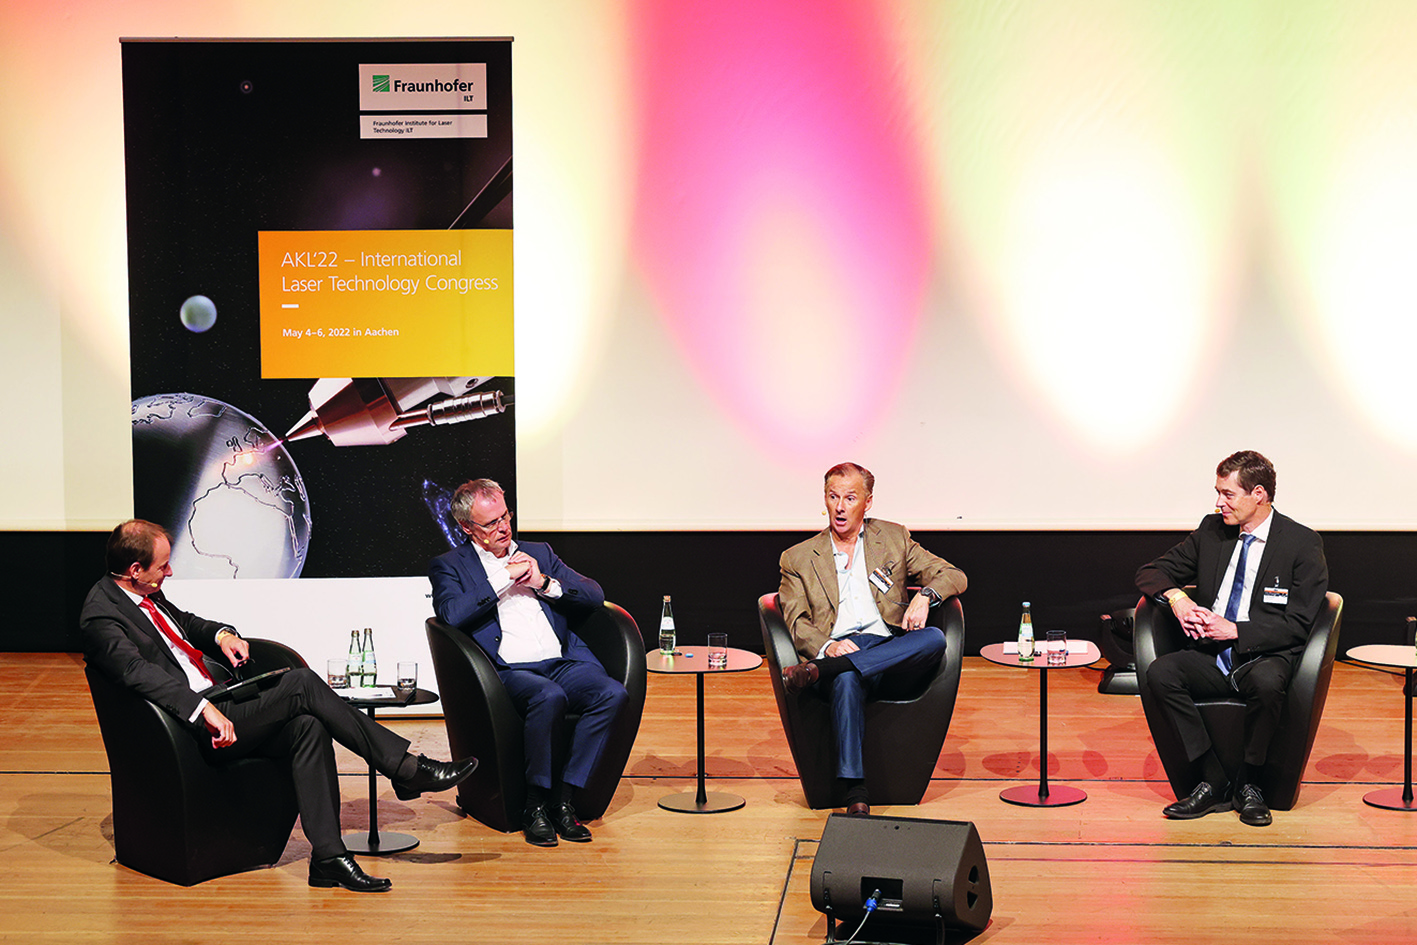 Panel discussion “Beam source development – quo vadis?” at AKL'22. From left to right: Prof. Constantin Häfner (Fraunhofer ILT), Dr. Christian Schmitz (TRUMPF), Dr. Mark Sobey (Coherent) and Volker Krause (Laserline).